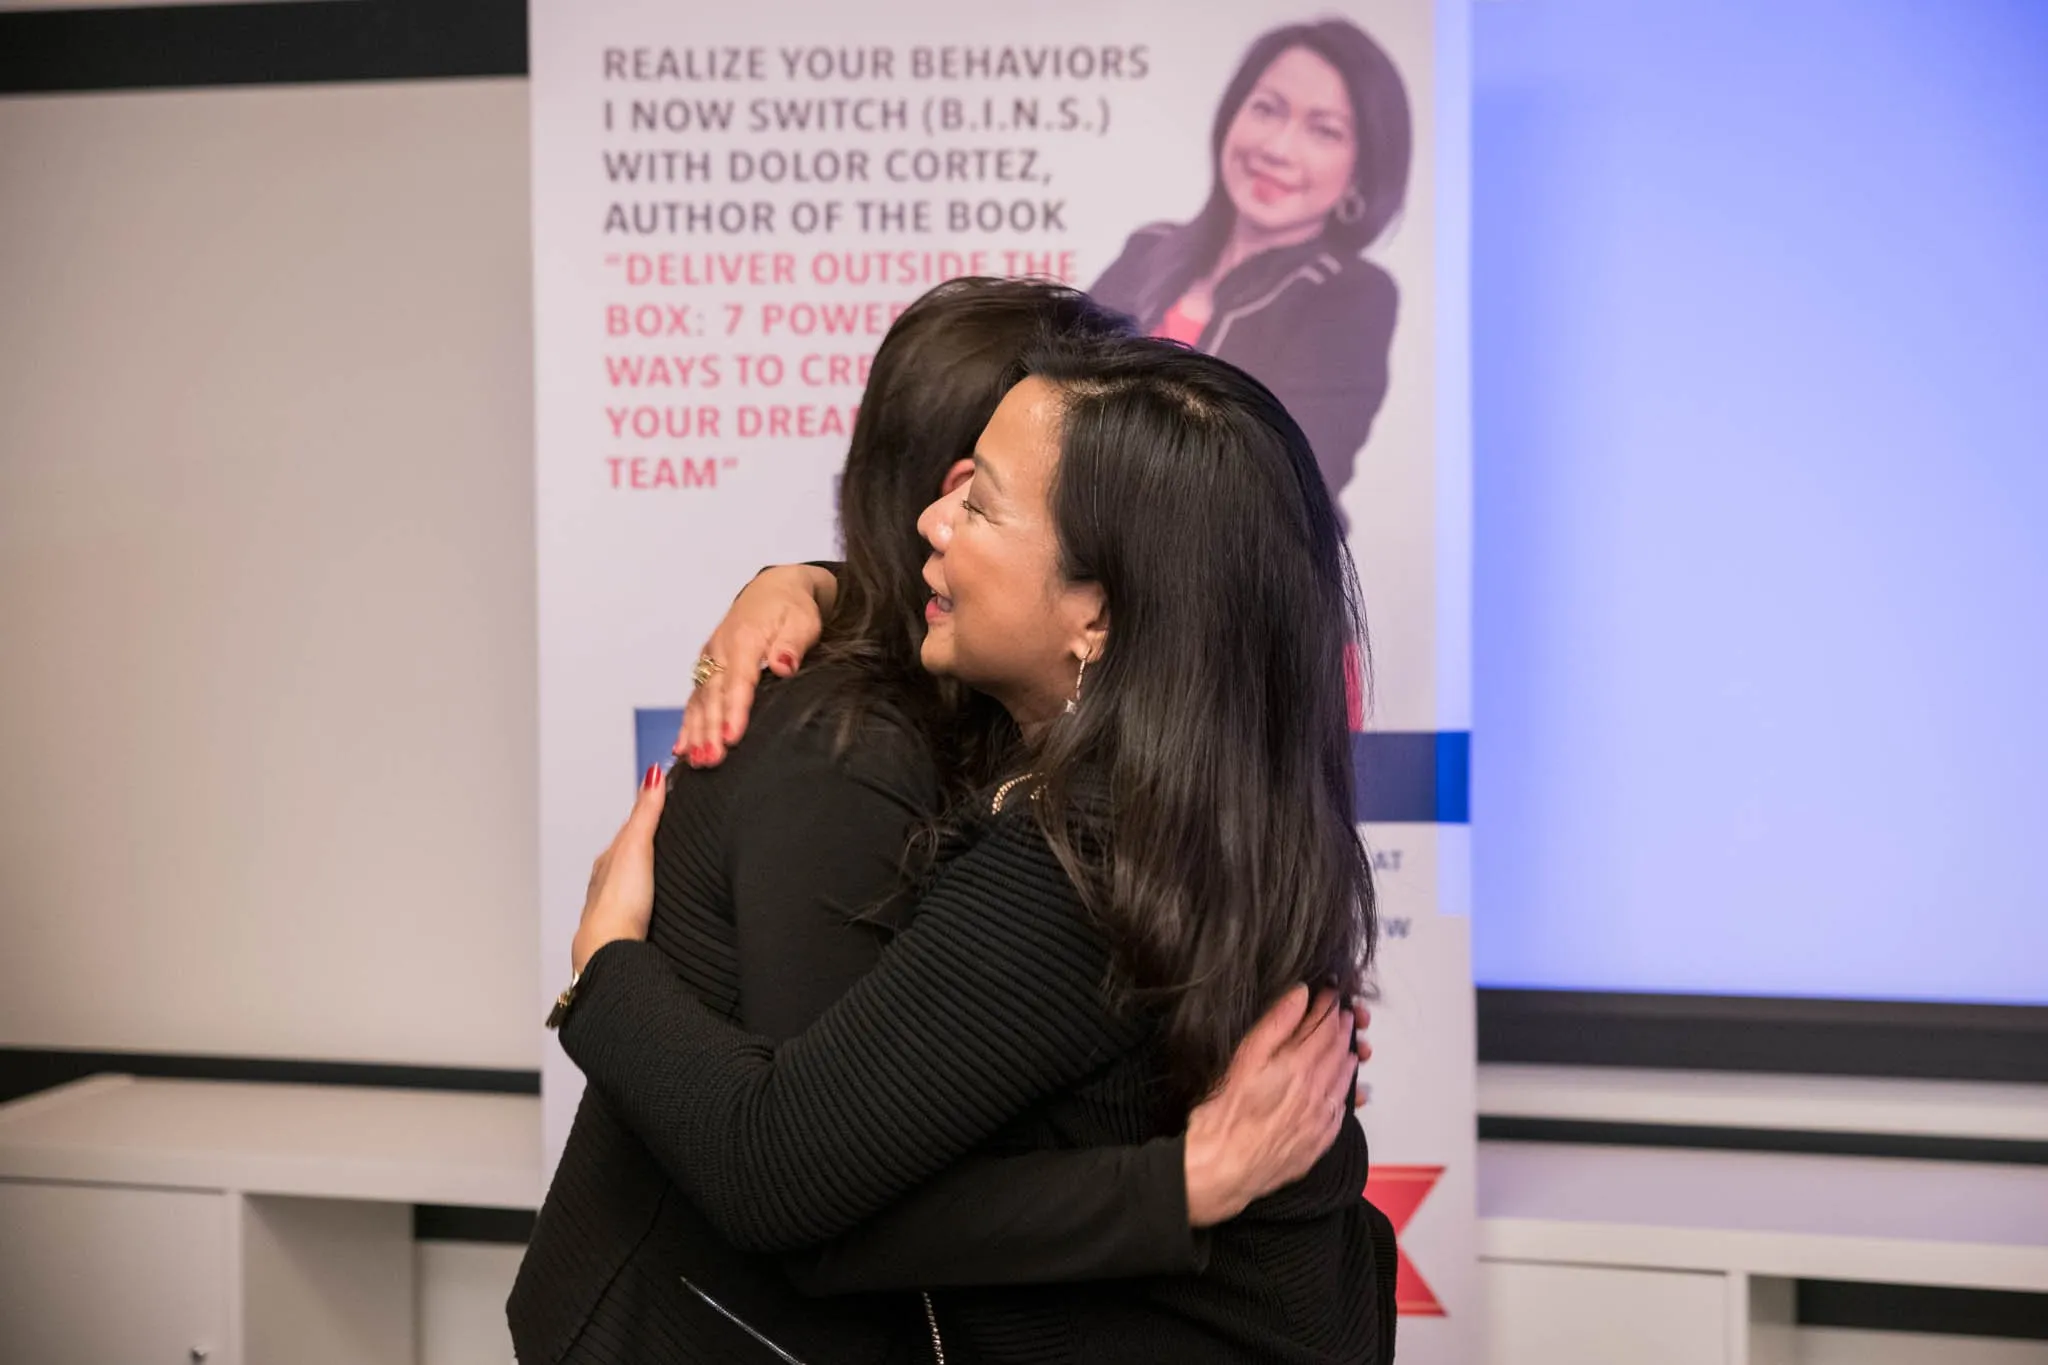 Dr. Ma Cherie Cortez showing her compassion during a coaching session at the KIVI event in the Netherlands 2018.